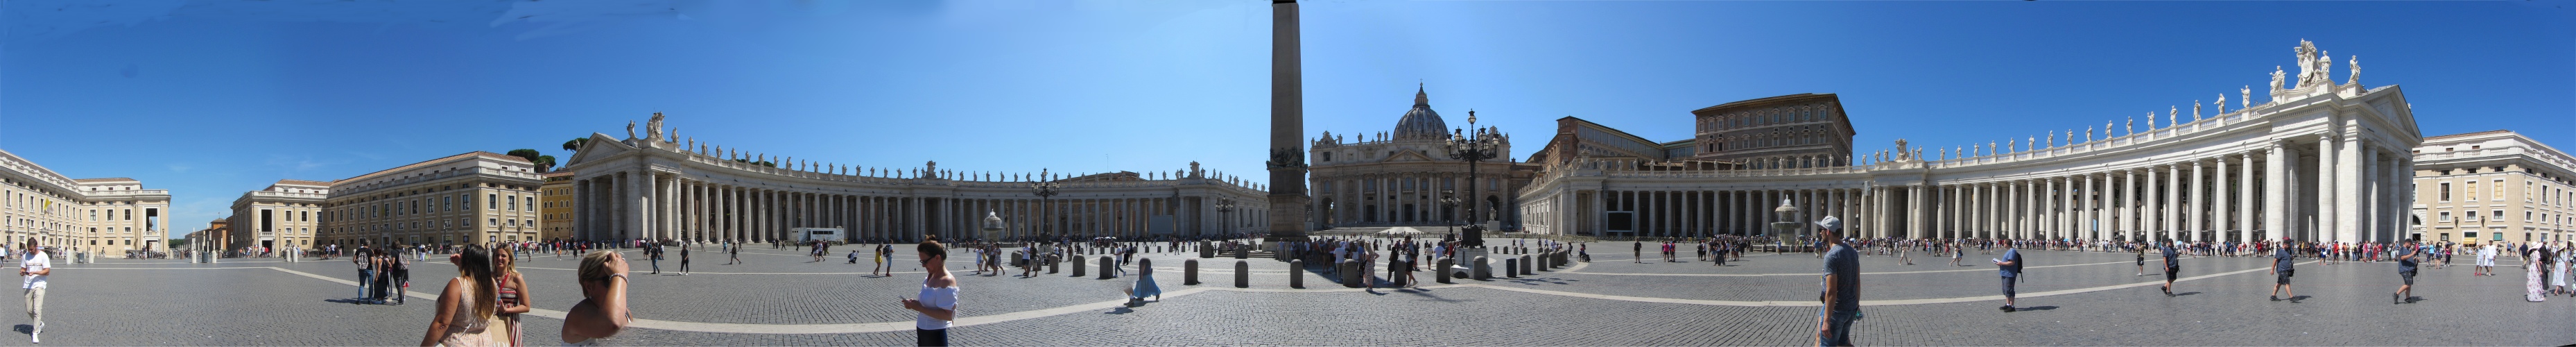 st_peters_square